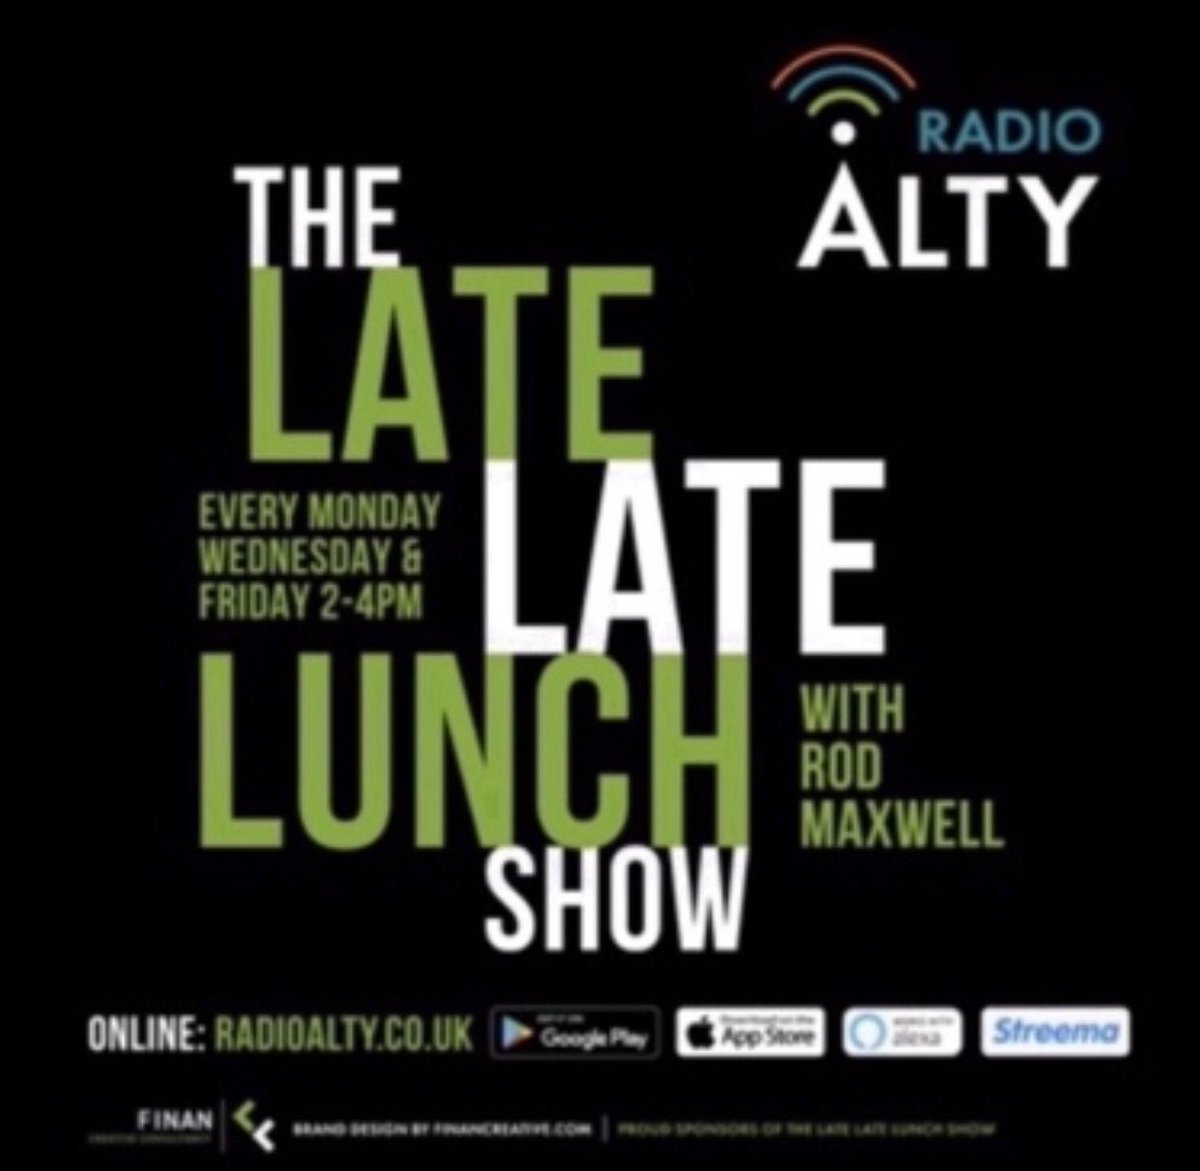 Track of the week on the show is the excellent “ Love And Let Go “ from the massively talented Alex Spencer.  Plus interview with The Great Leslie following their Night & Day gig this week.  #theLateLateLunchshow on RadioAlty.co.uk - online - apps - Alexa.   #alexspencer